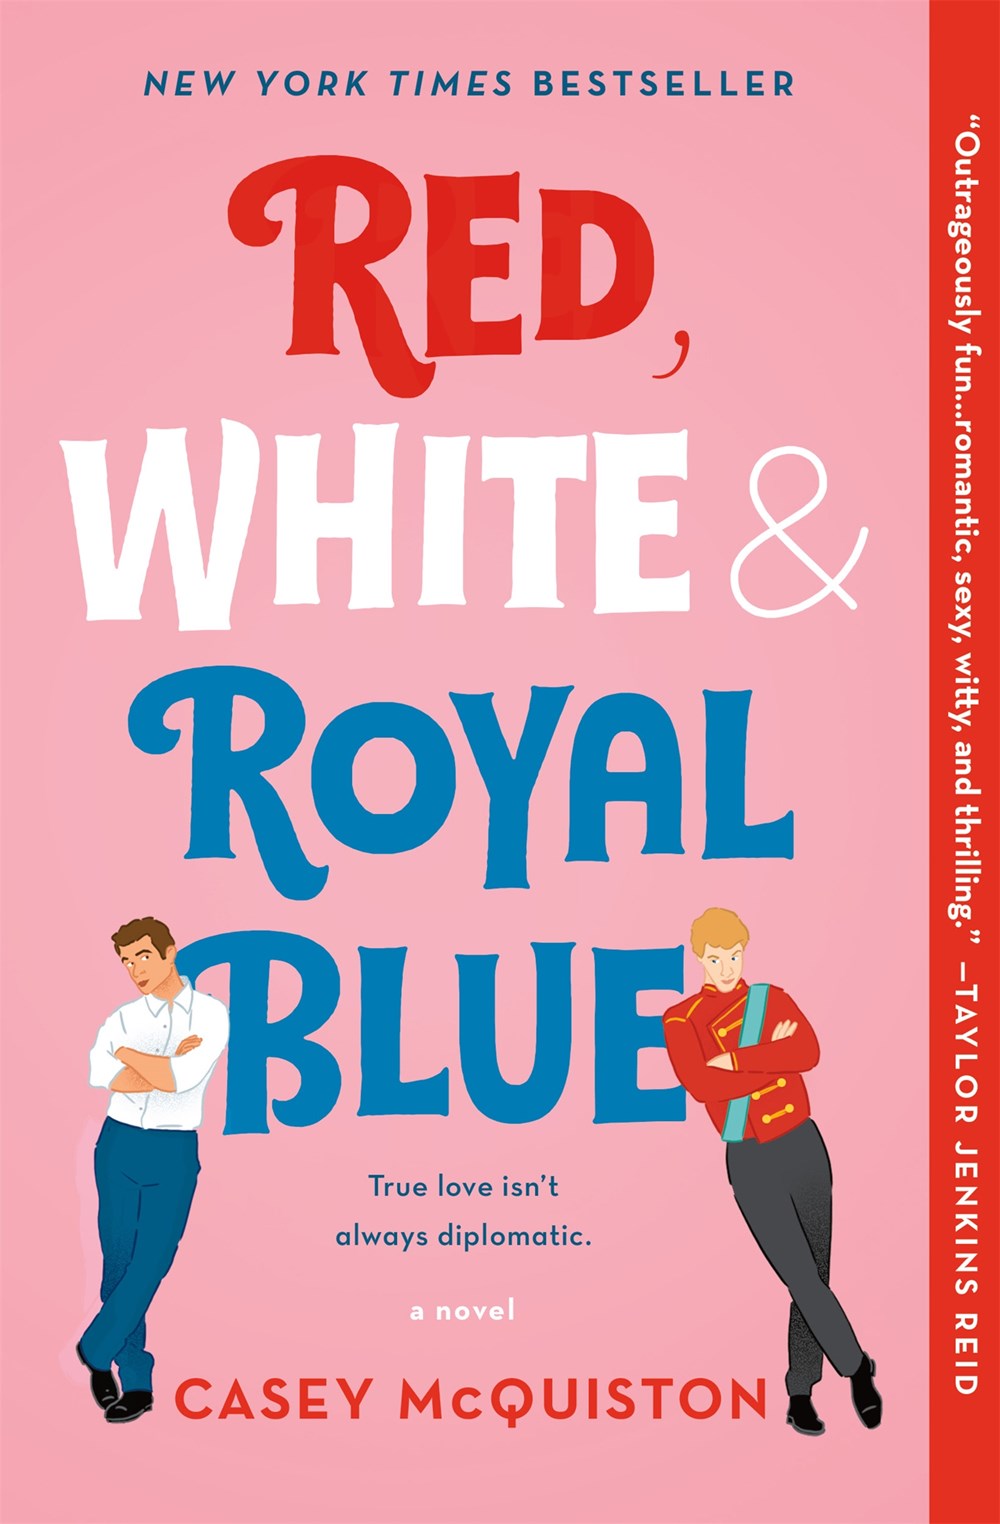 Red, White, and Royal Blue: A Novel by Casey McQuiston